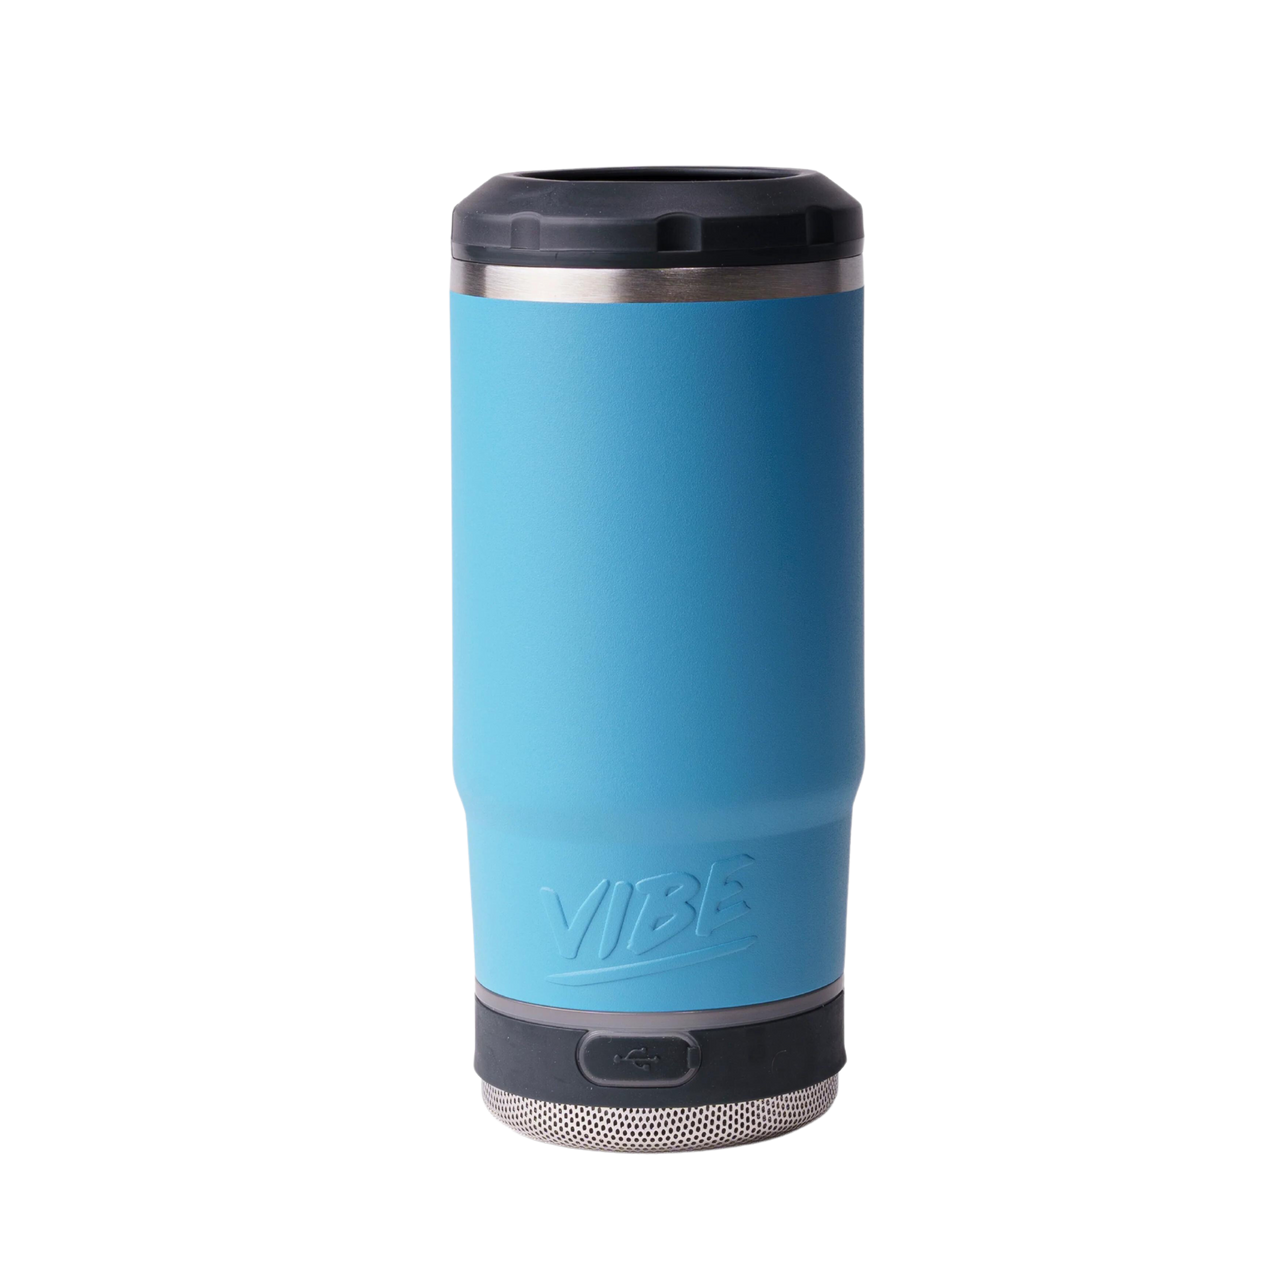 VIBE 4-IN-1 Drink Cooler With Base Speaker Attachment